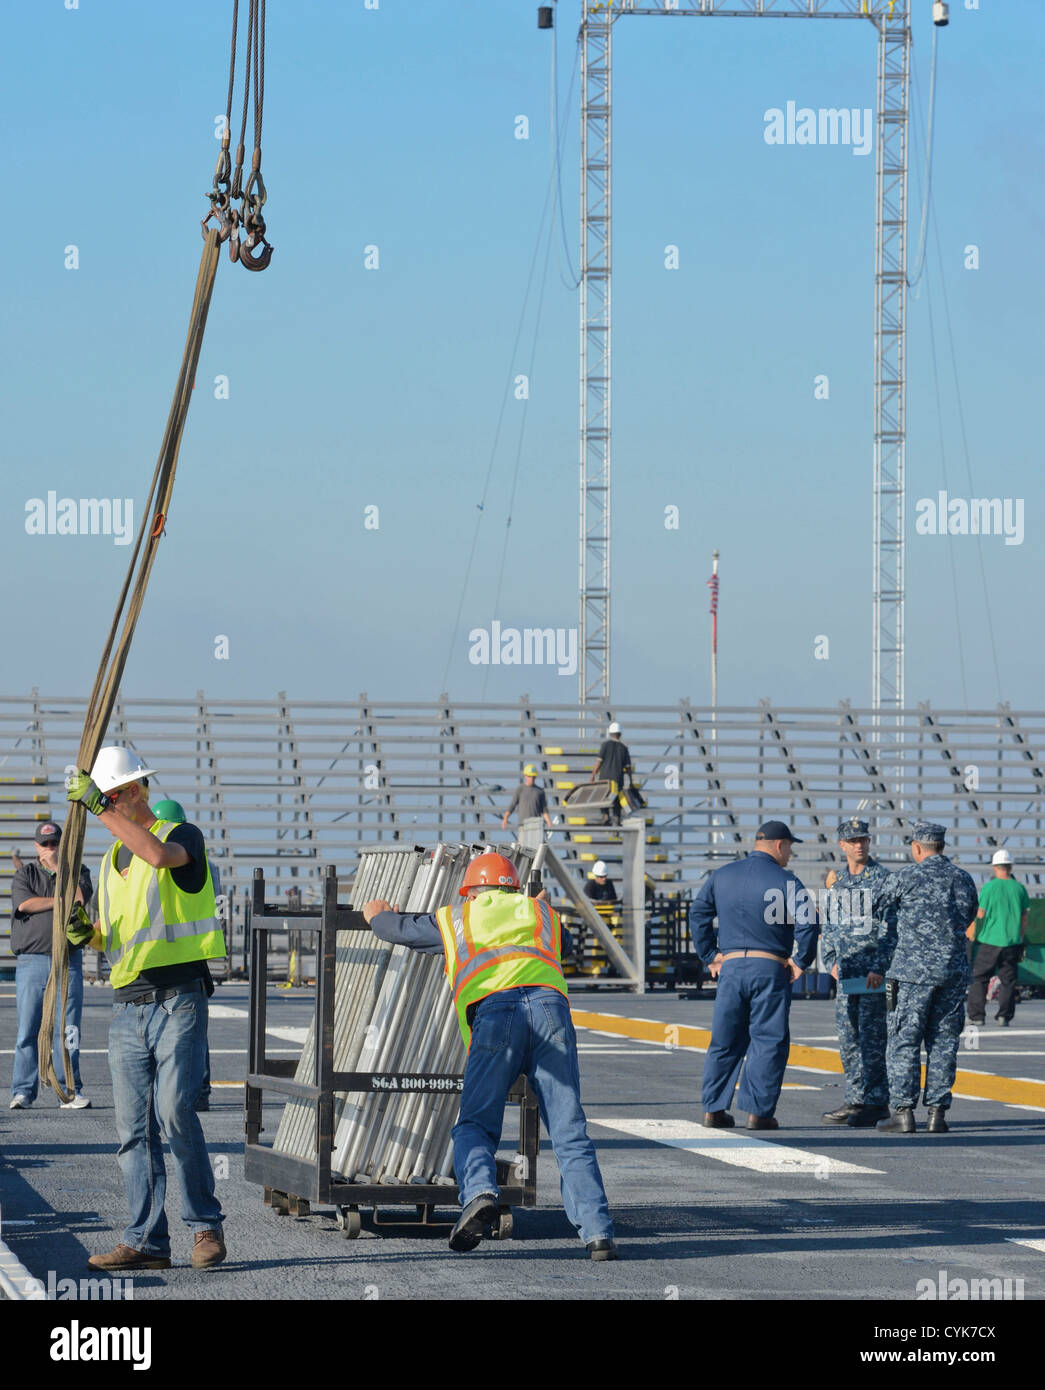 MAYPORT, Fla. (November 3, 2012) -- Workers from MUSCO construction company along with Sailors from USS Bataan (LHD 5) transform Stock Photo